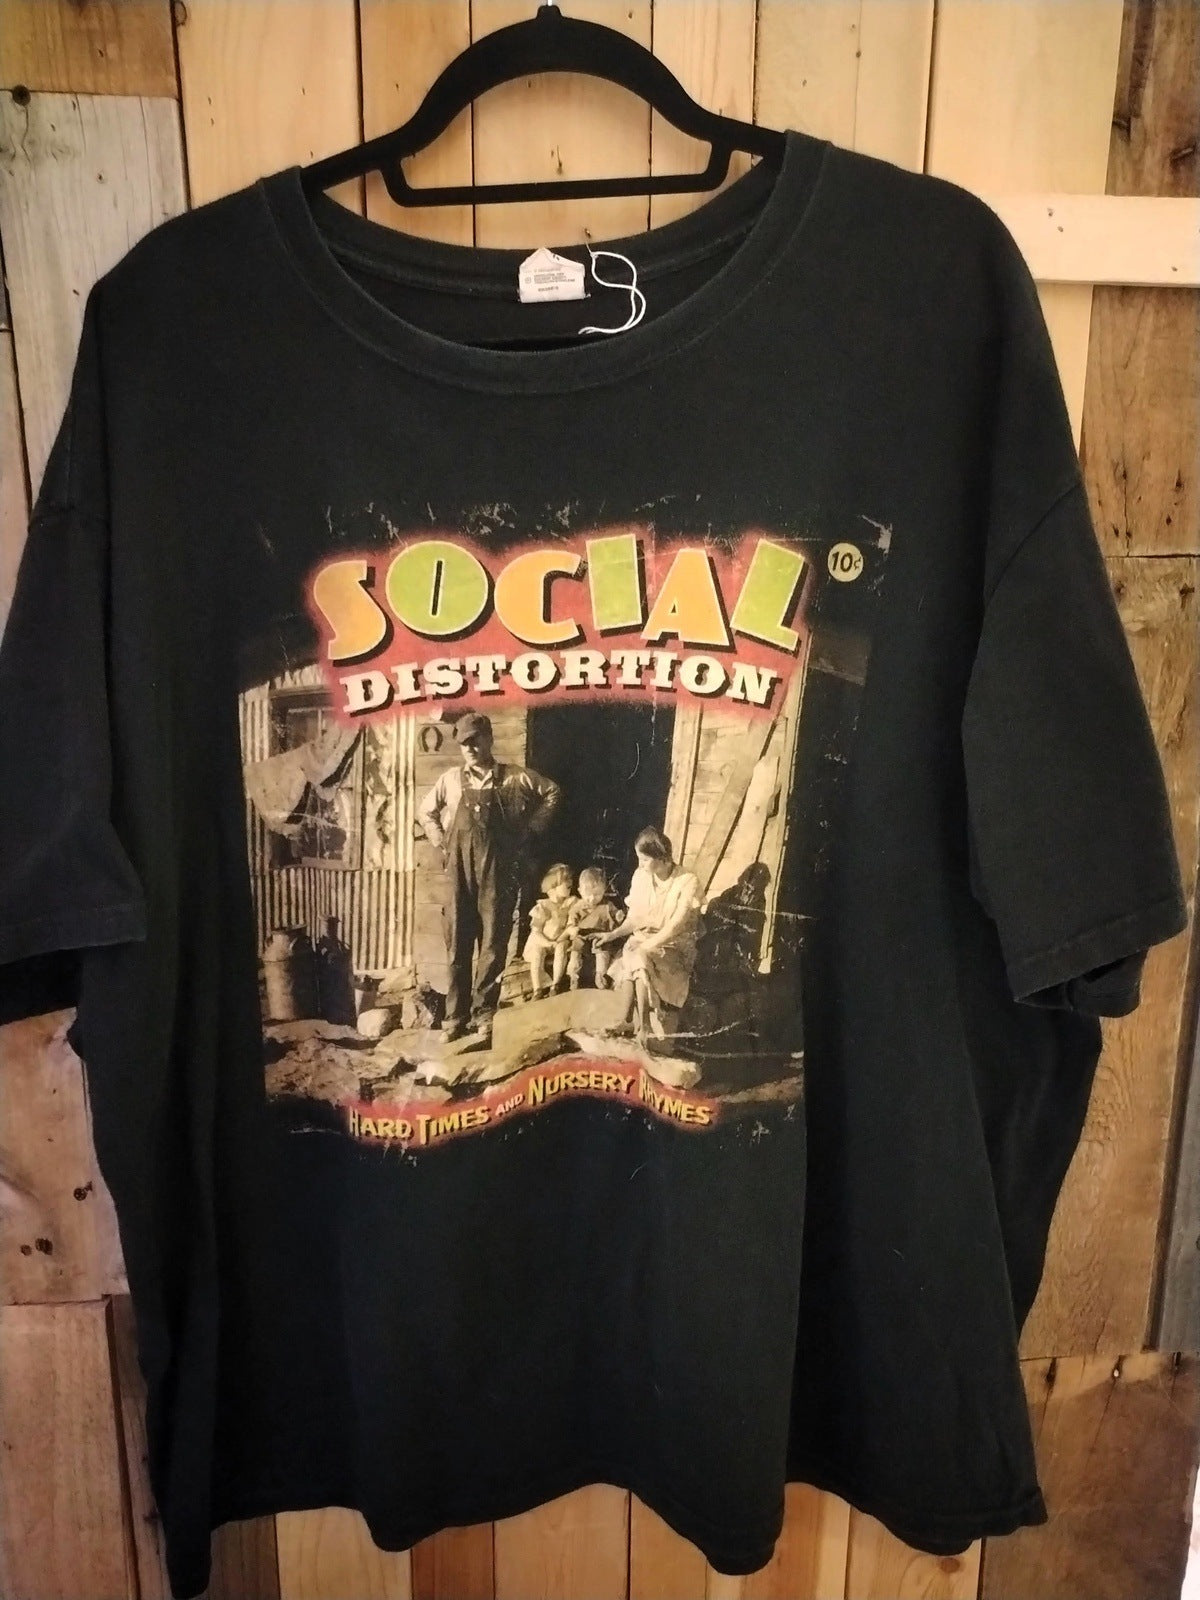 Social Distortion Hard Times and Nursery Rhymes T Shirt Size 2X